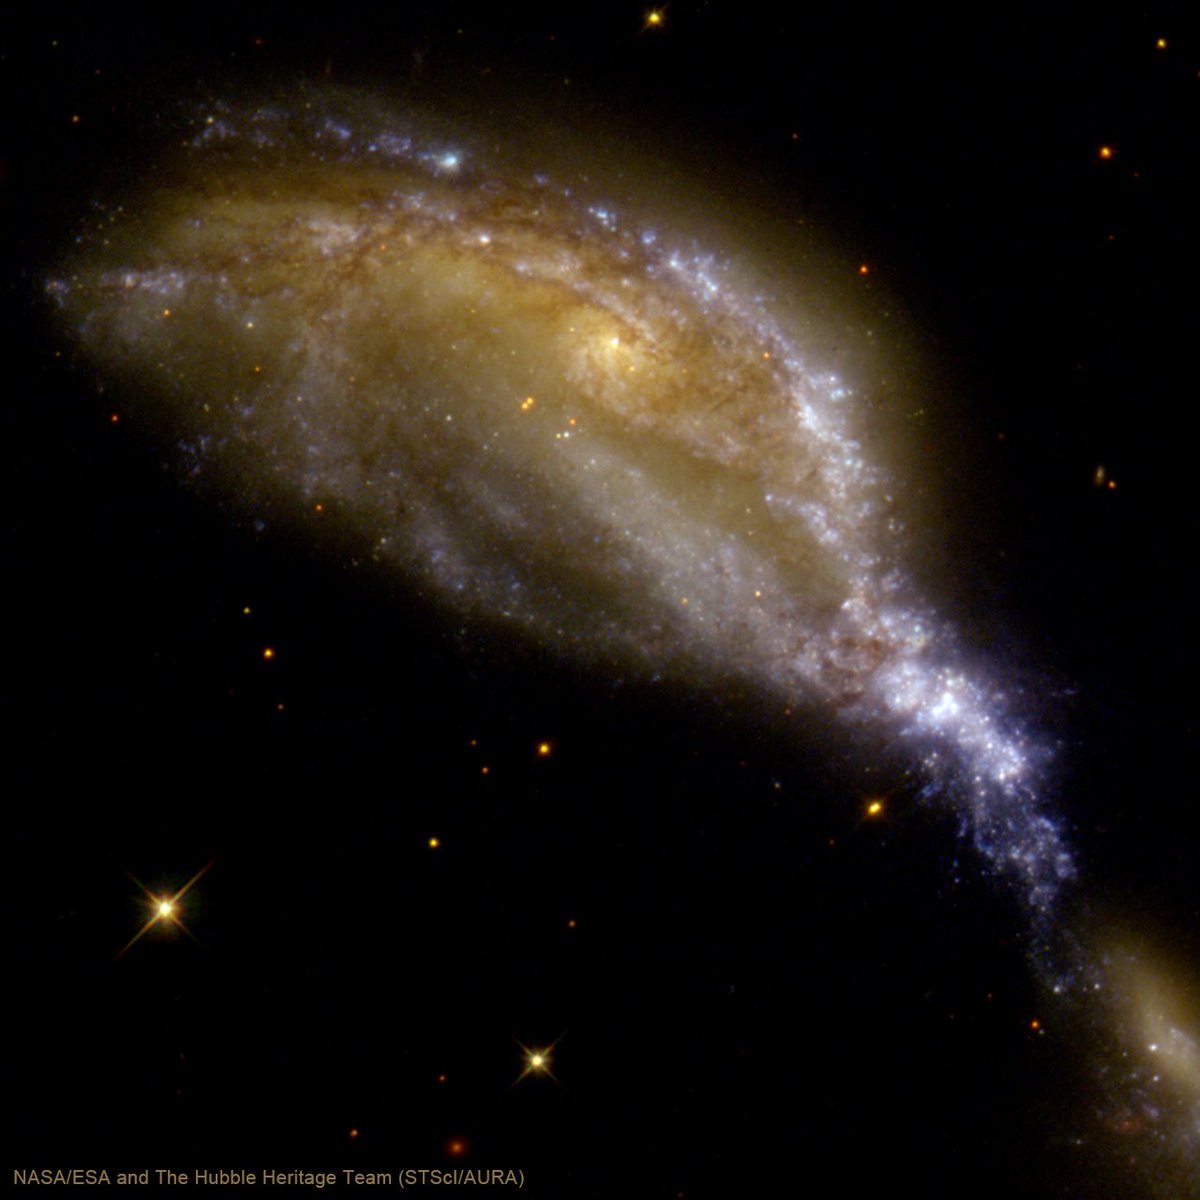 Today Chandra is studying a galaxy cluster in Lyra. Nearby in the sky is NGC 6745. Shaped like the head of a bird about to grab a tasty bite of food, the galaxy's spiral shape has been distorted by a collision with a smaller galaxy located almost out of view on the lower right.